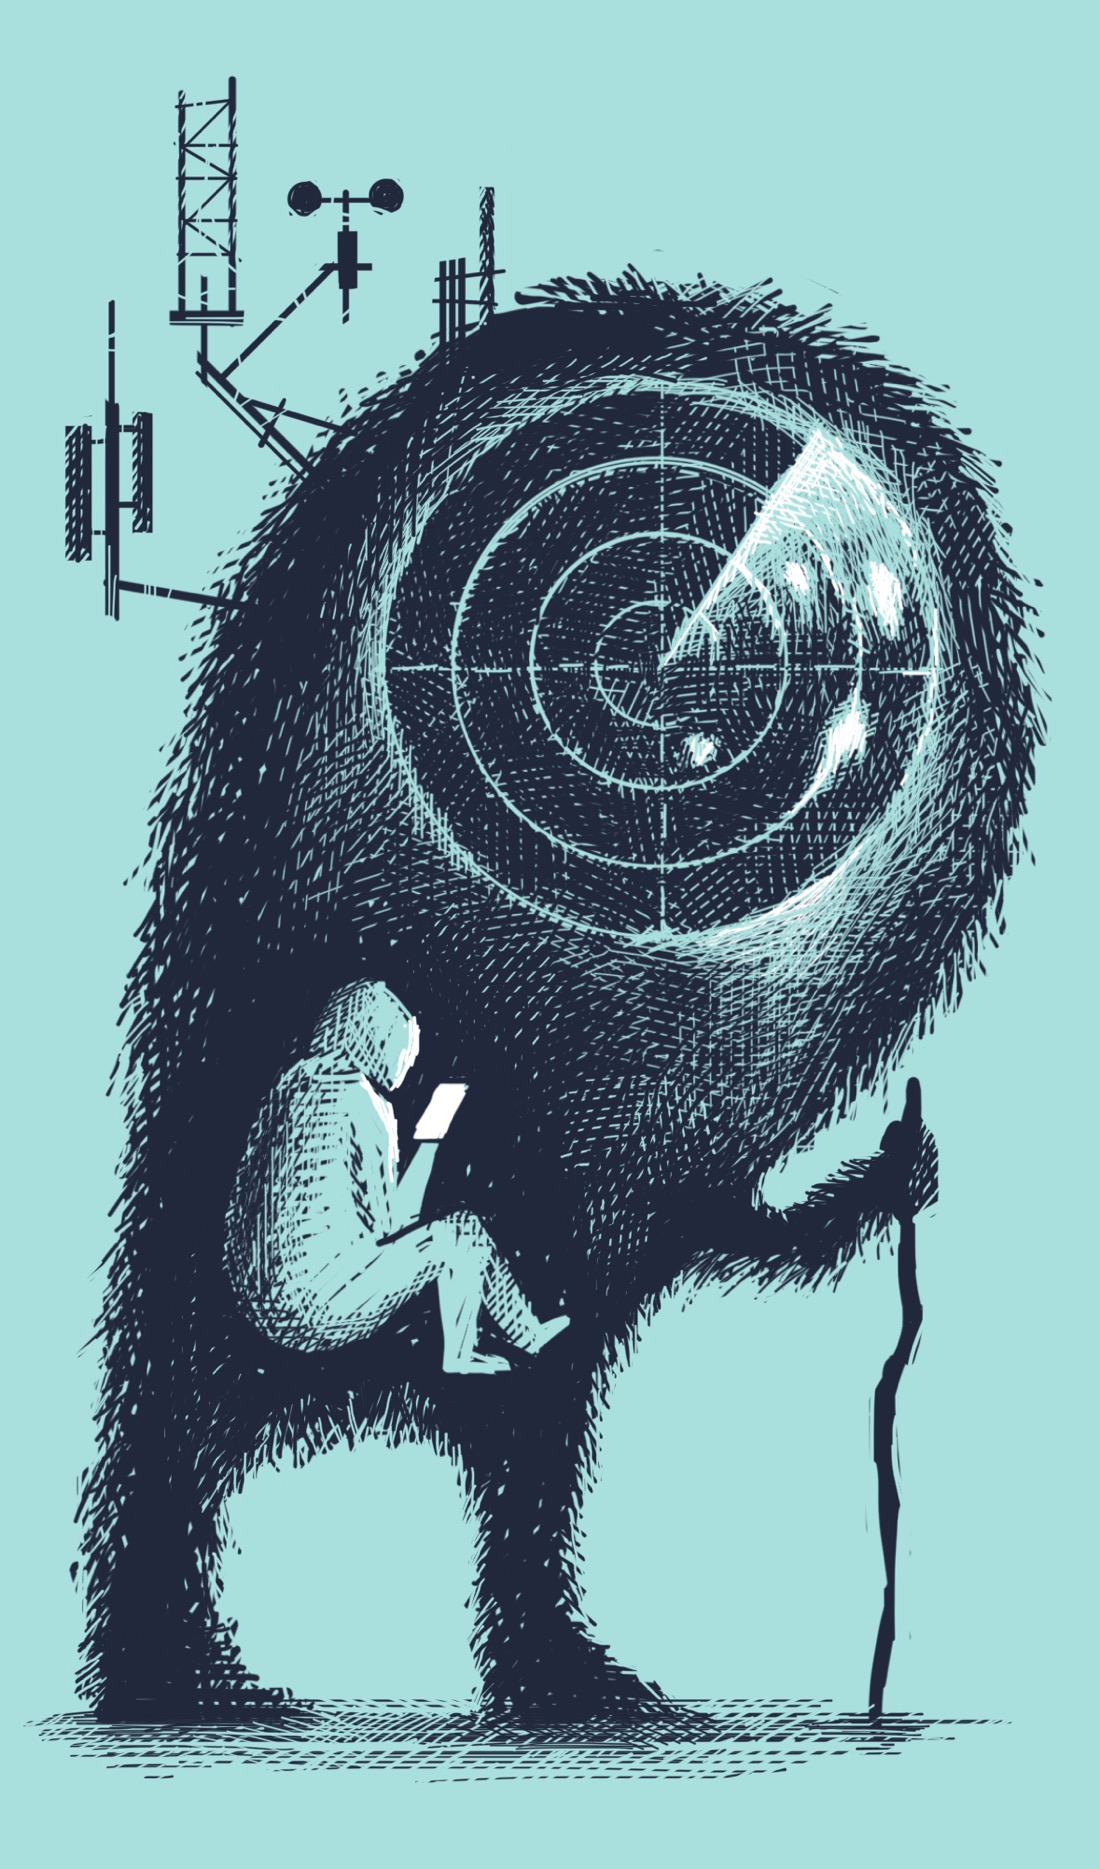 A large, black, furry creature with a giant head. Where the face would be is a large radar screen instead, depicting several glowing blobs. The figure is holding a walking stick; several complex antennas bristle from its head. Inside its belly sits a person looking at a phone.